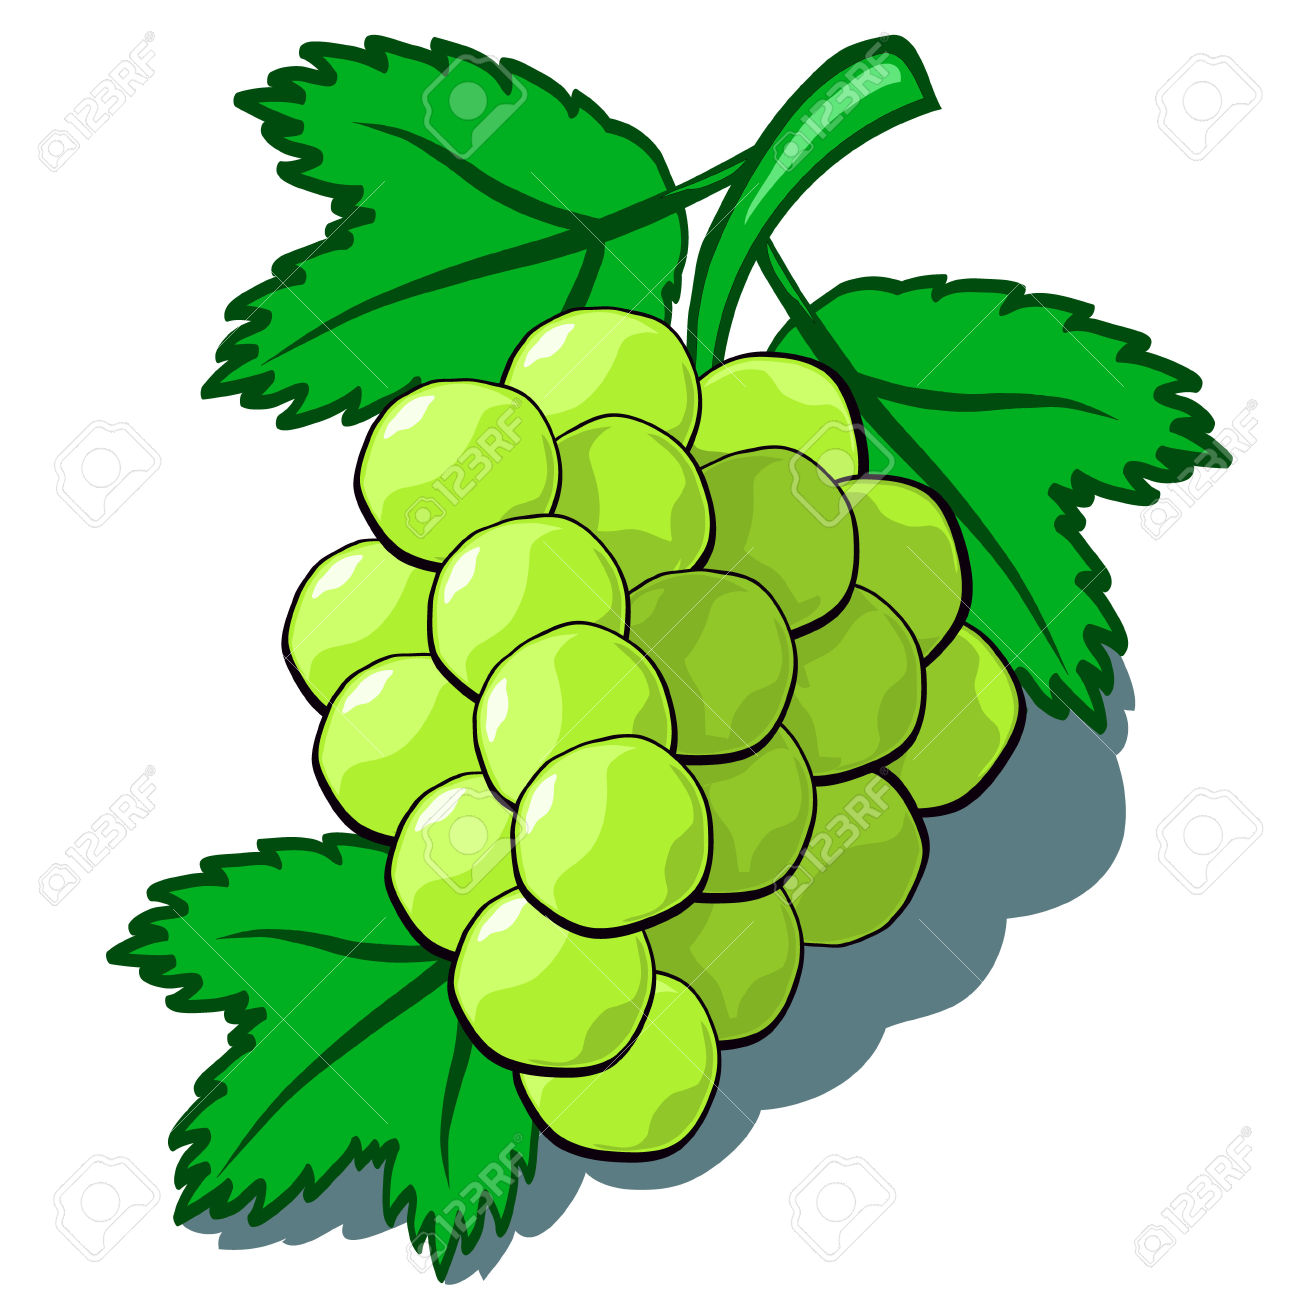 clipart of grapes - photo #49